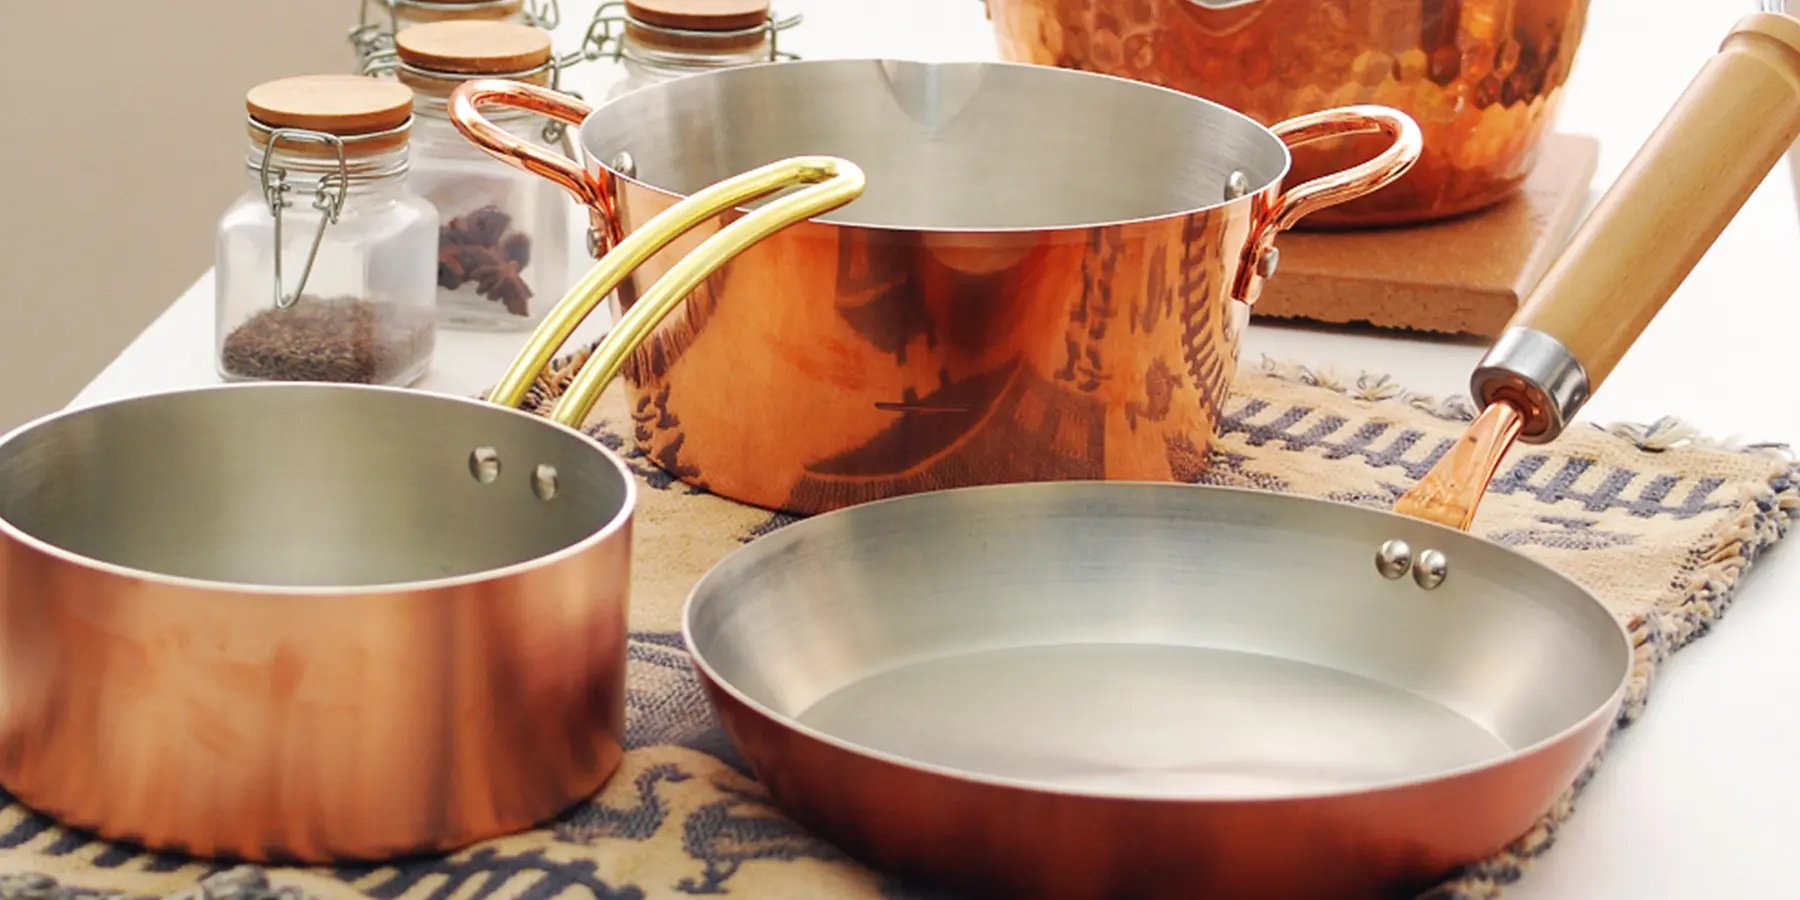 Discover our great selection of Japanese Copperware at Globalkitchen Japan.